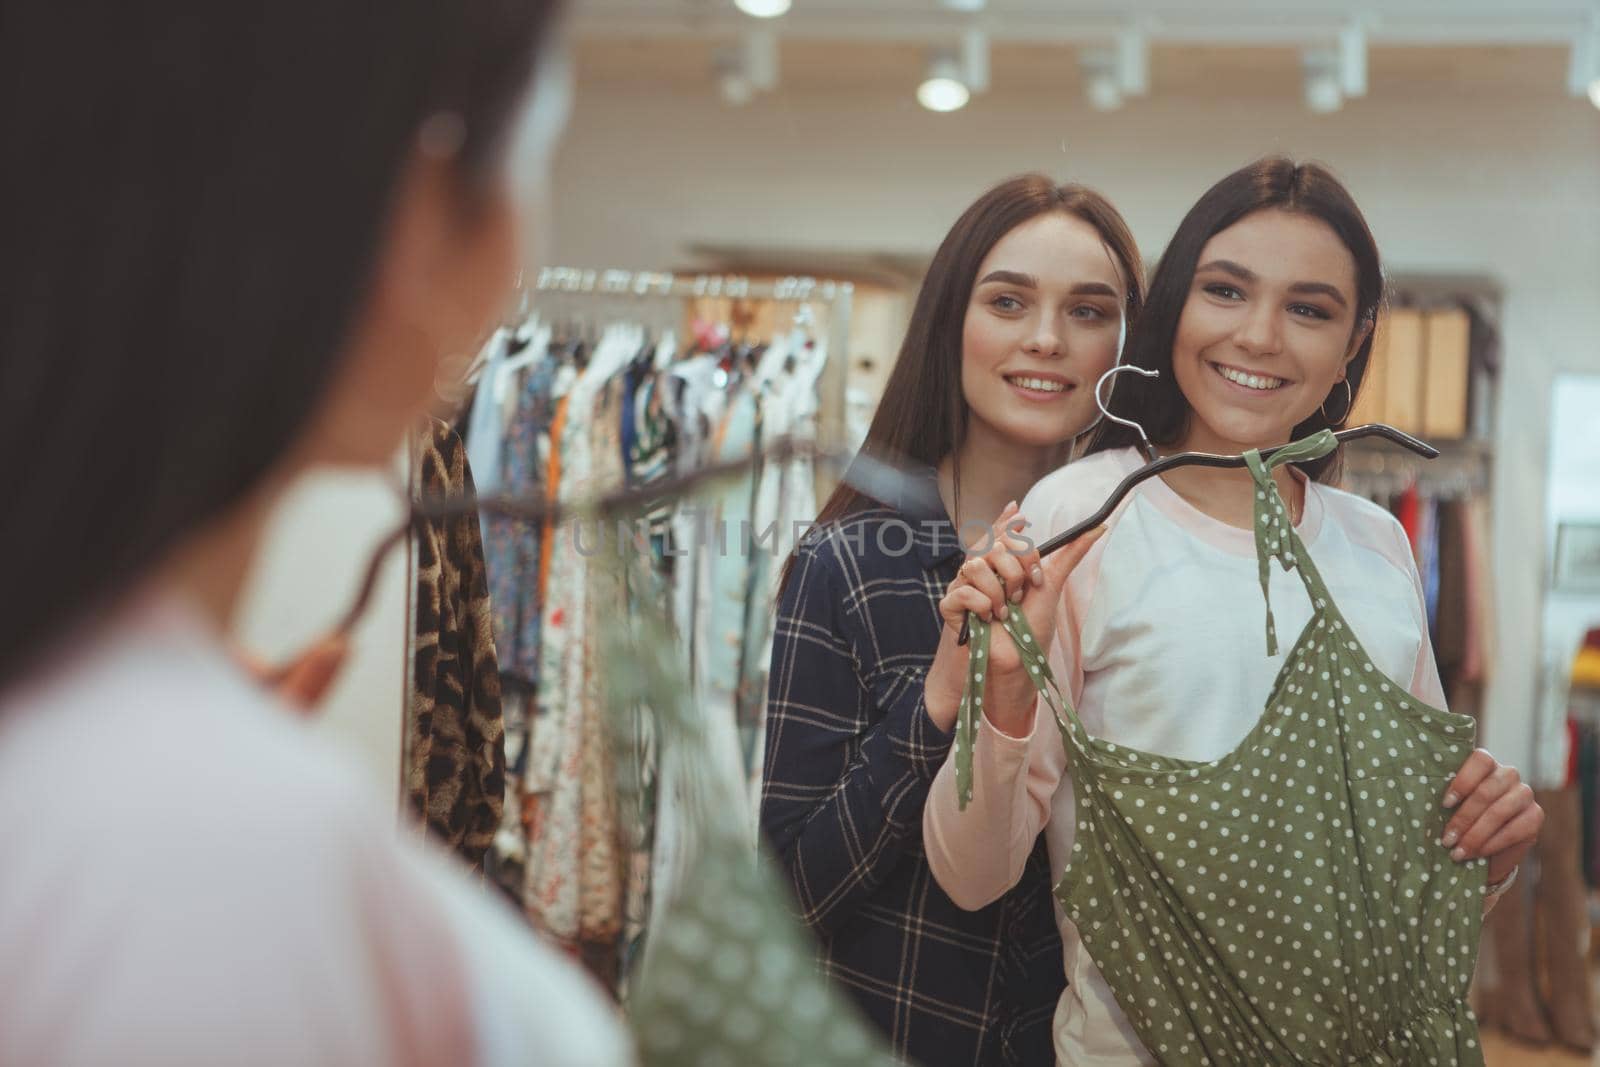 Cheerful beautiful woman smiling, helping her best friend choosing a new dress to buy. Two female friends examining a dress in front of the mirror at clothing store. Gorgeous woman shopping with friend